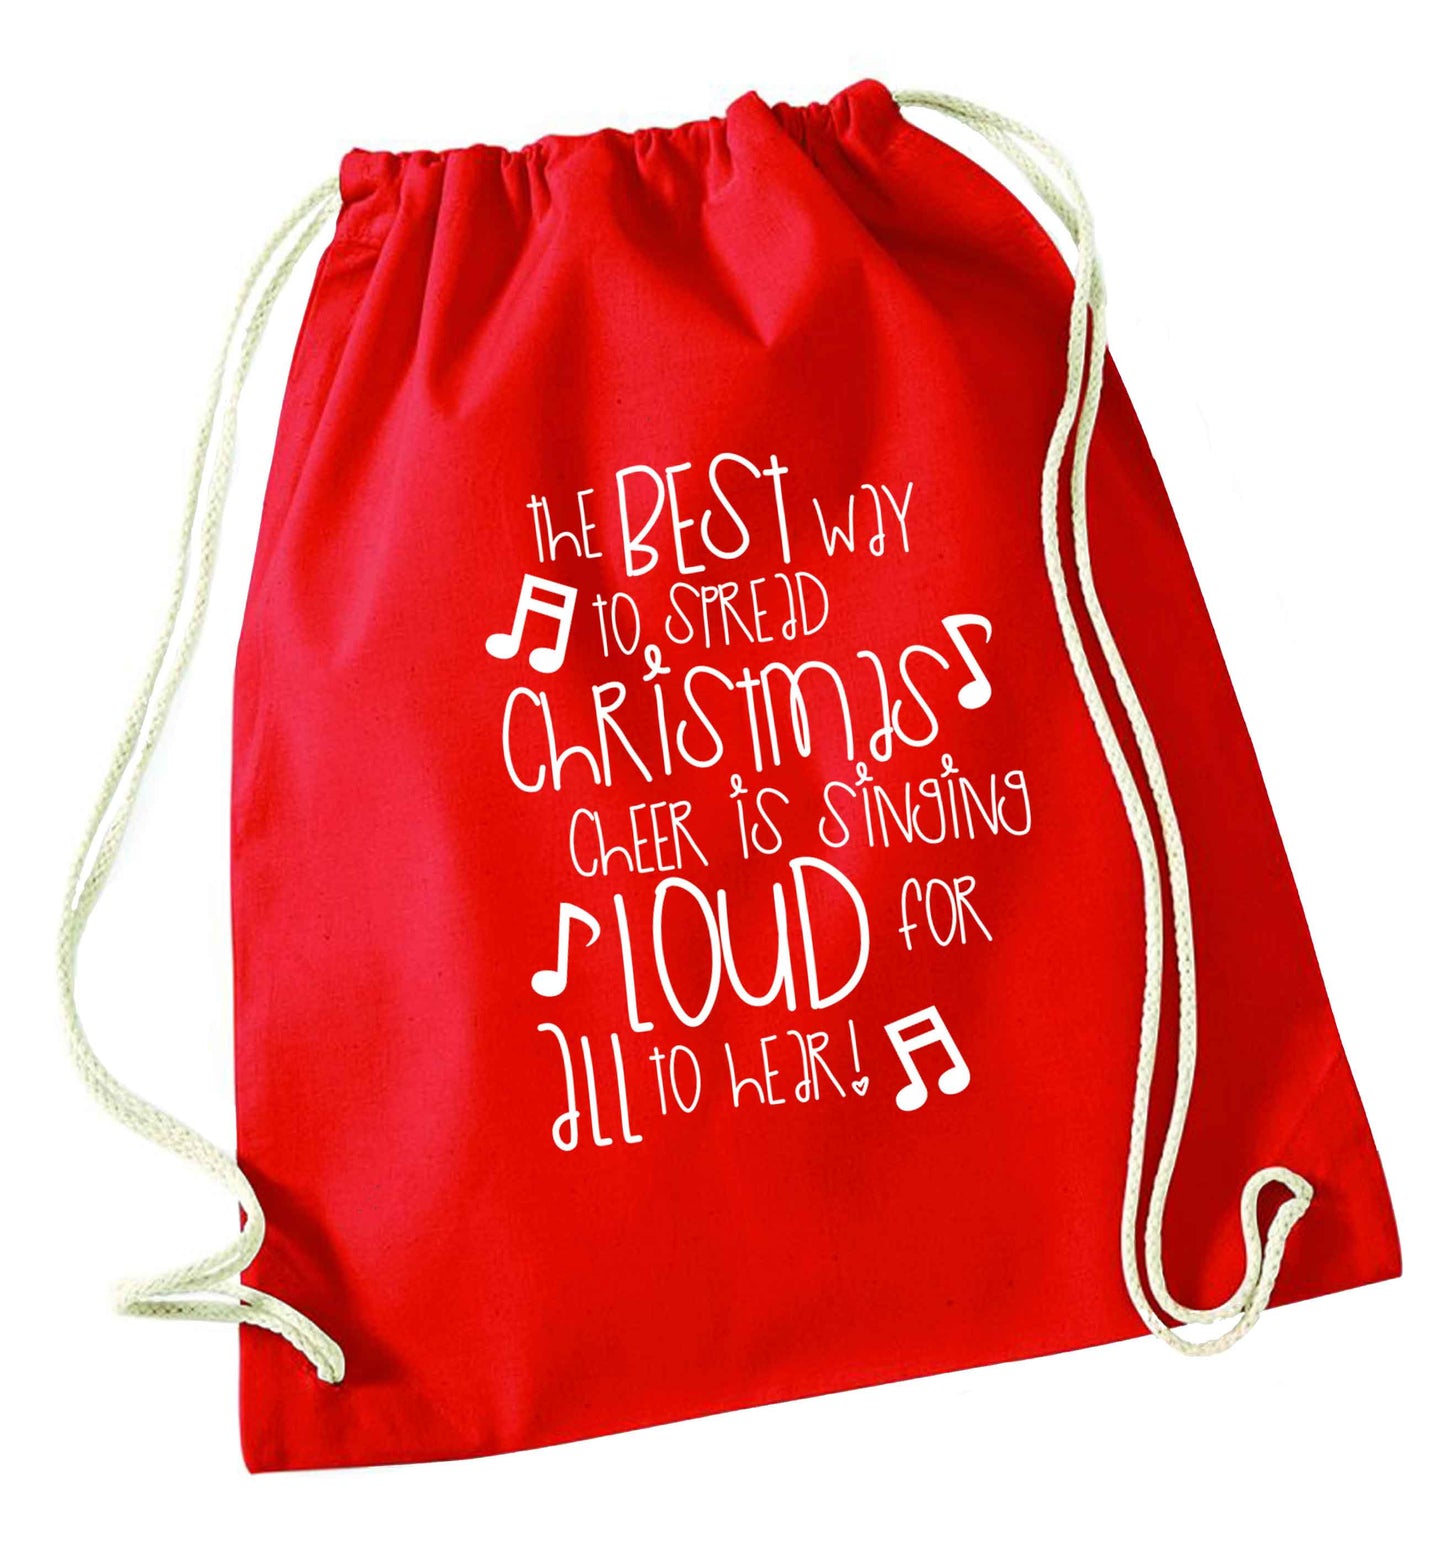 The best way to spread Christmas cheer is singing loud for all to hear red drawstring bag 